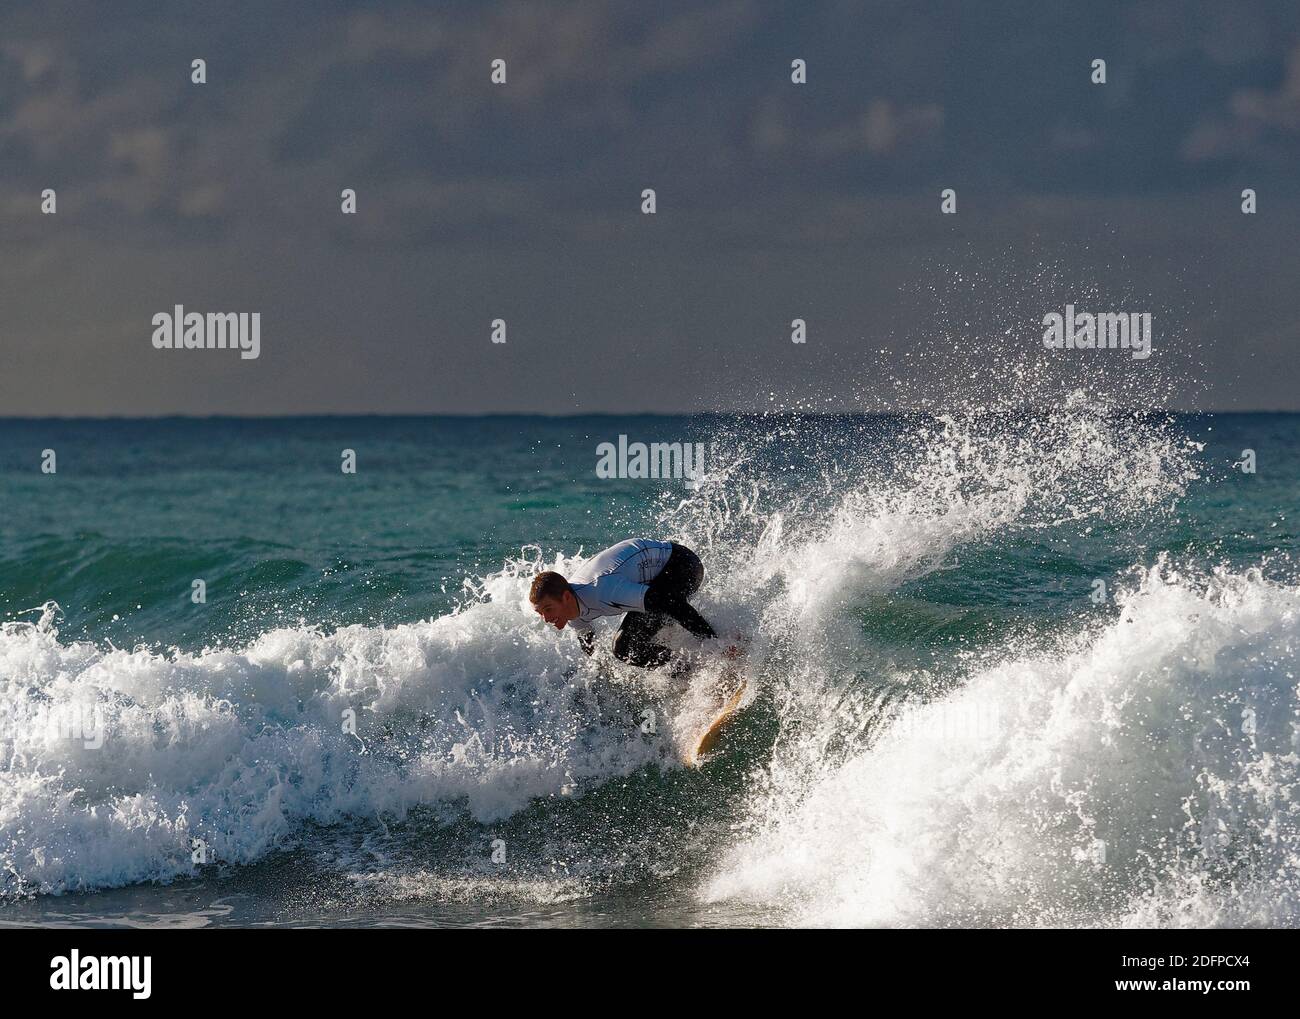 Newquay,Cornwall, 6th December 2020. UK weather, The Jet stream moves to give warm sunshine at the Lightning Bolt Single Fin shoot out surfing competition at Little Fistral beach, Collectors and enthusiasts brought vintage classic single fin Gerry Lopez surfboards to surf in Cornwall. Credit: Robert Taylor/Alamy Live News” Stock Photo